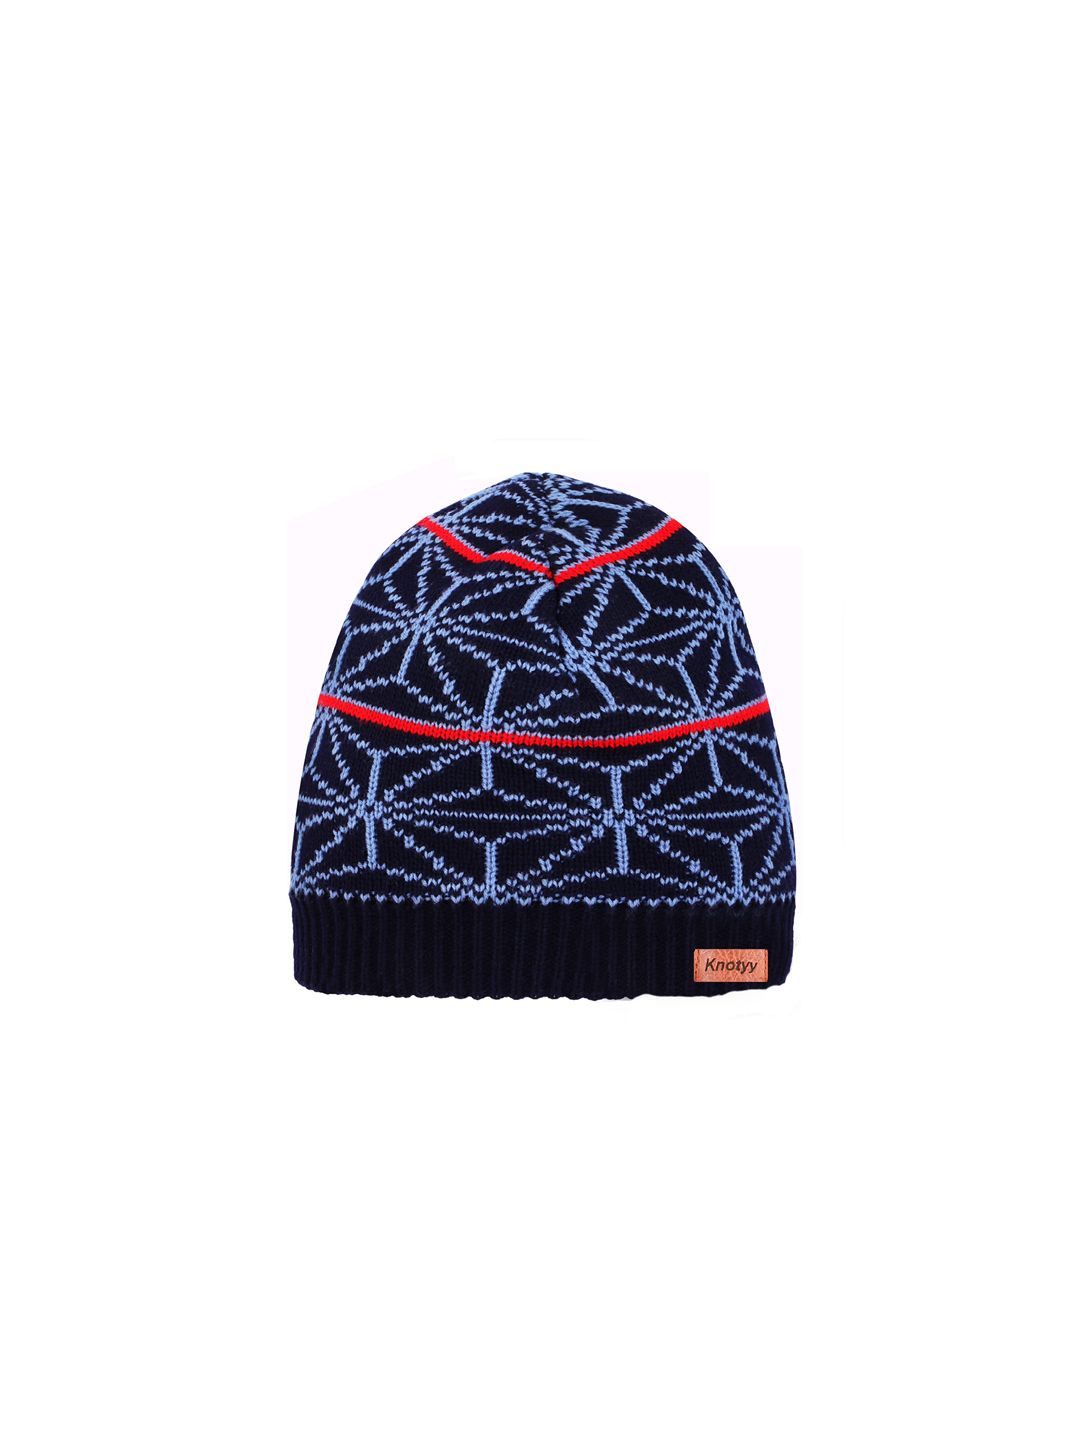 Knotyy Unisex Black & Blue Printed Beanie Price in India